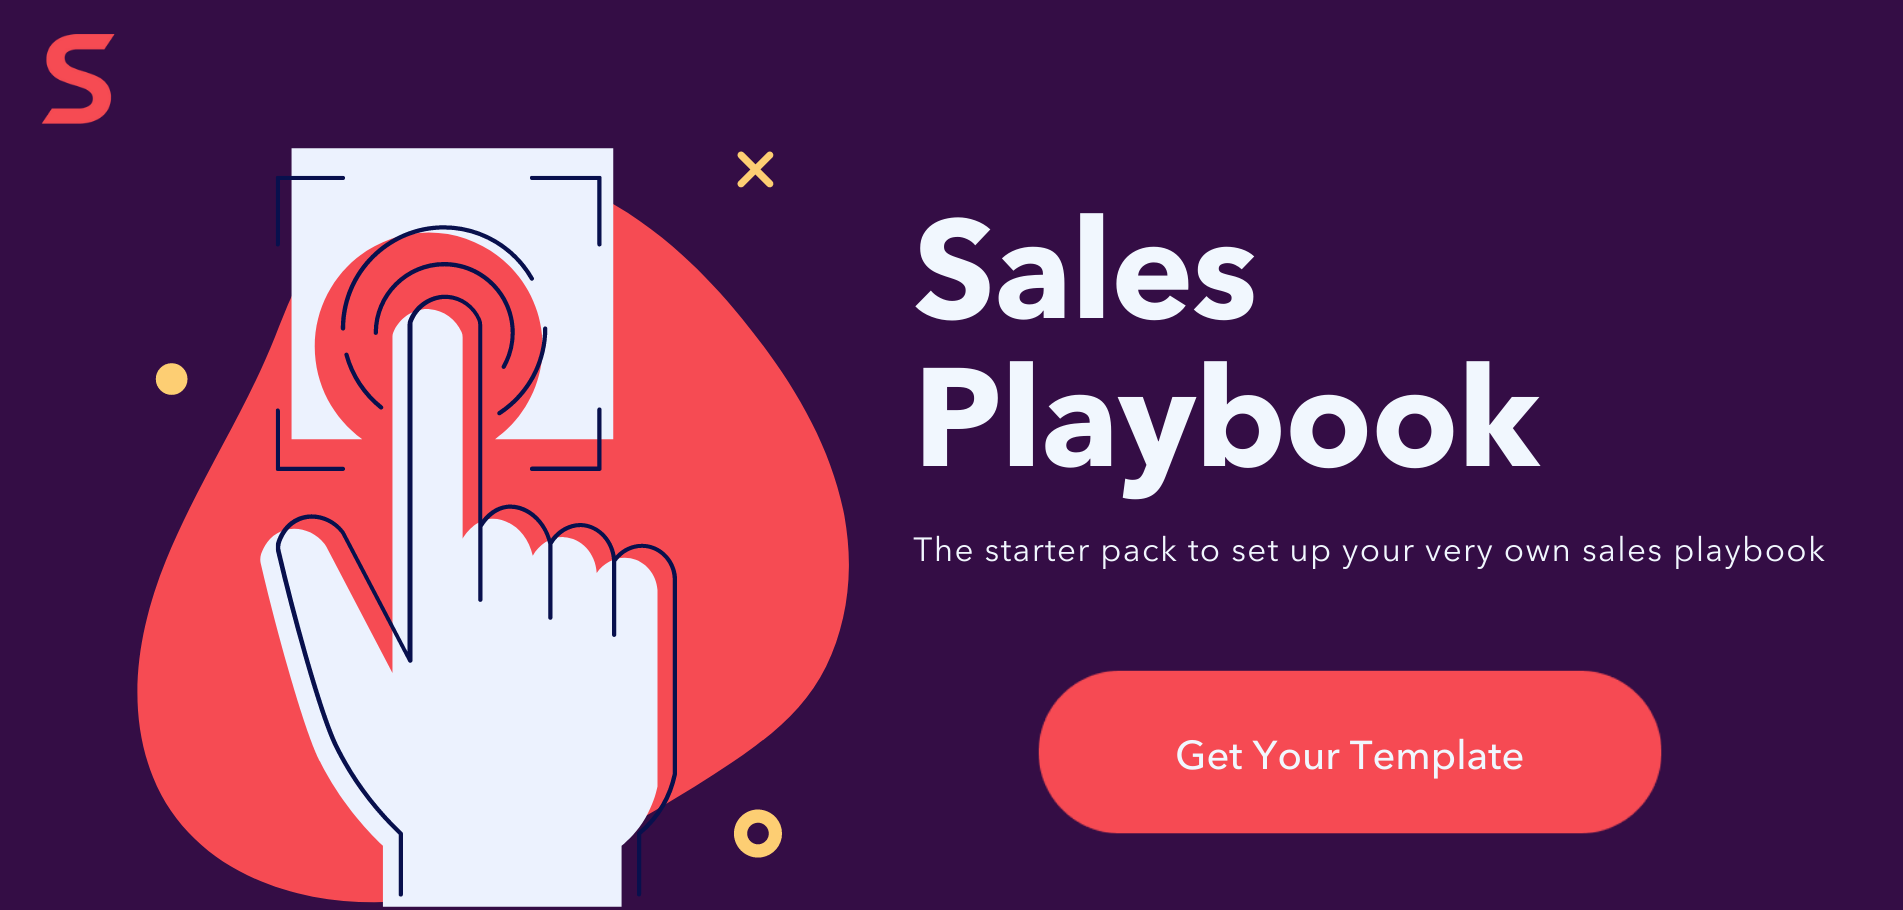 5 Killer Sales Playbook Examples From Top Companies (With Free Templates)